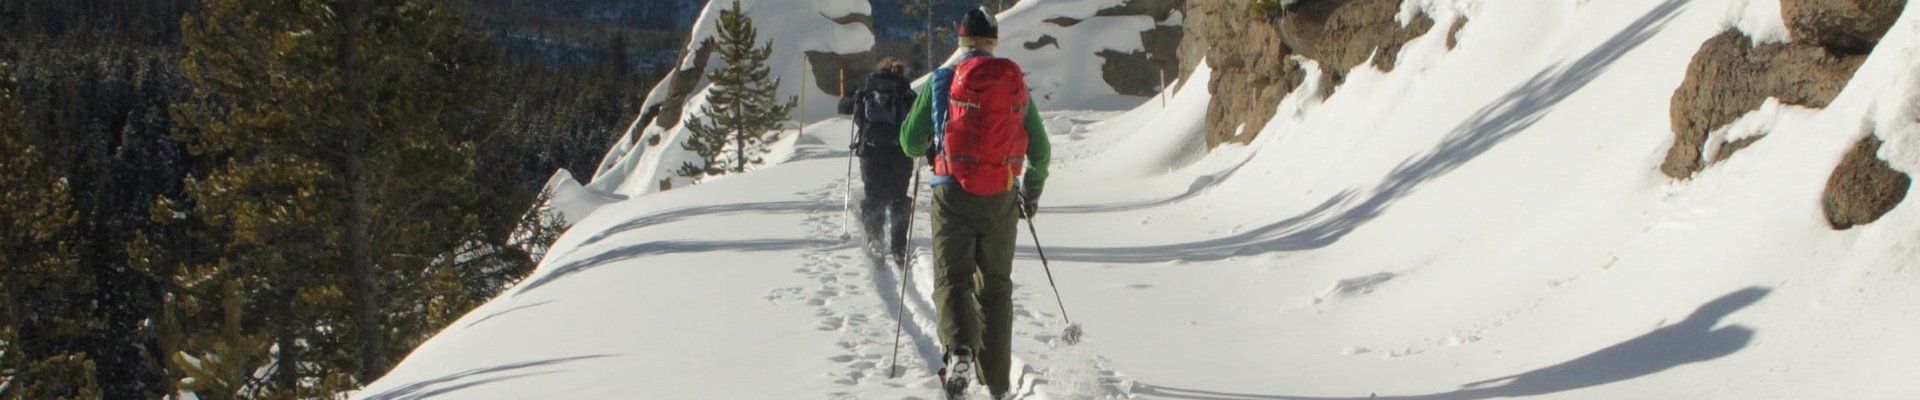 Two cross country skiers on a trail in Yellowstone during the winter